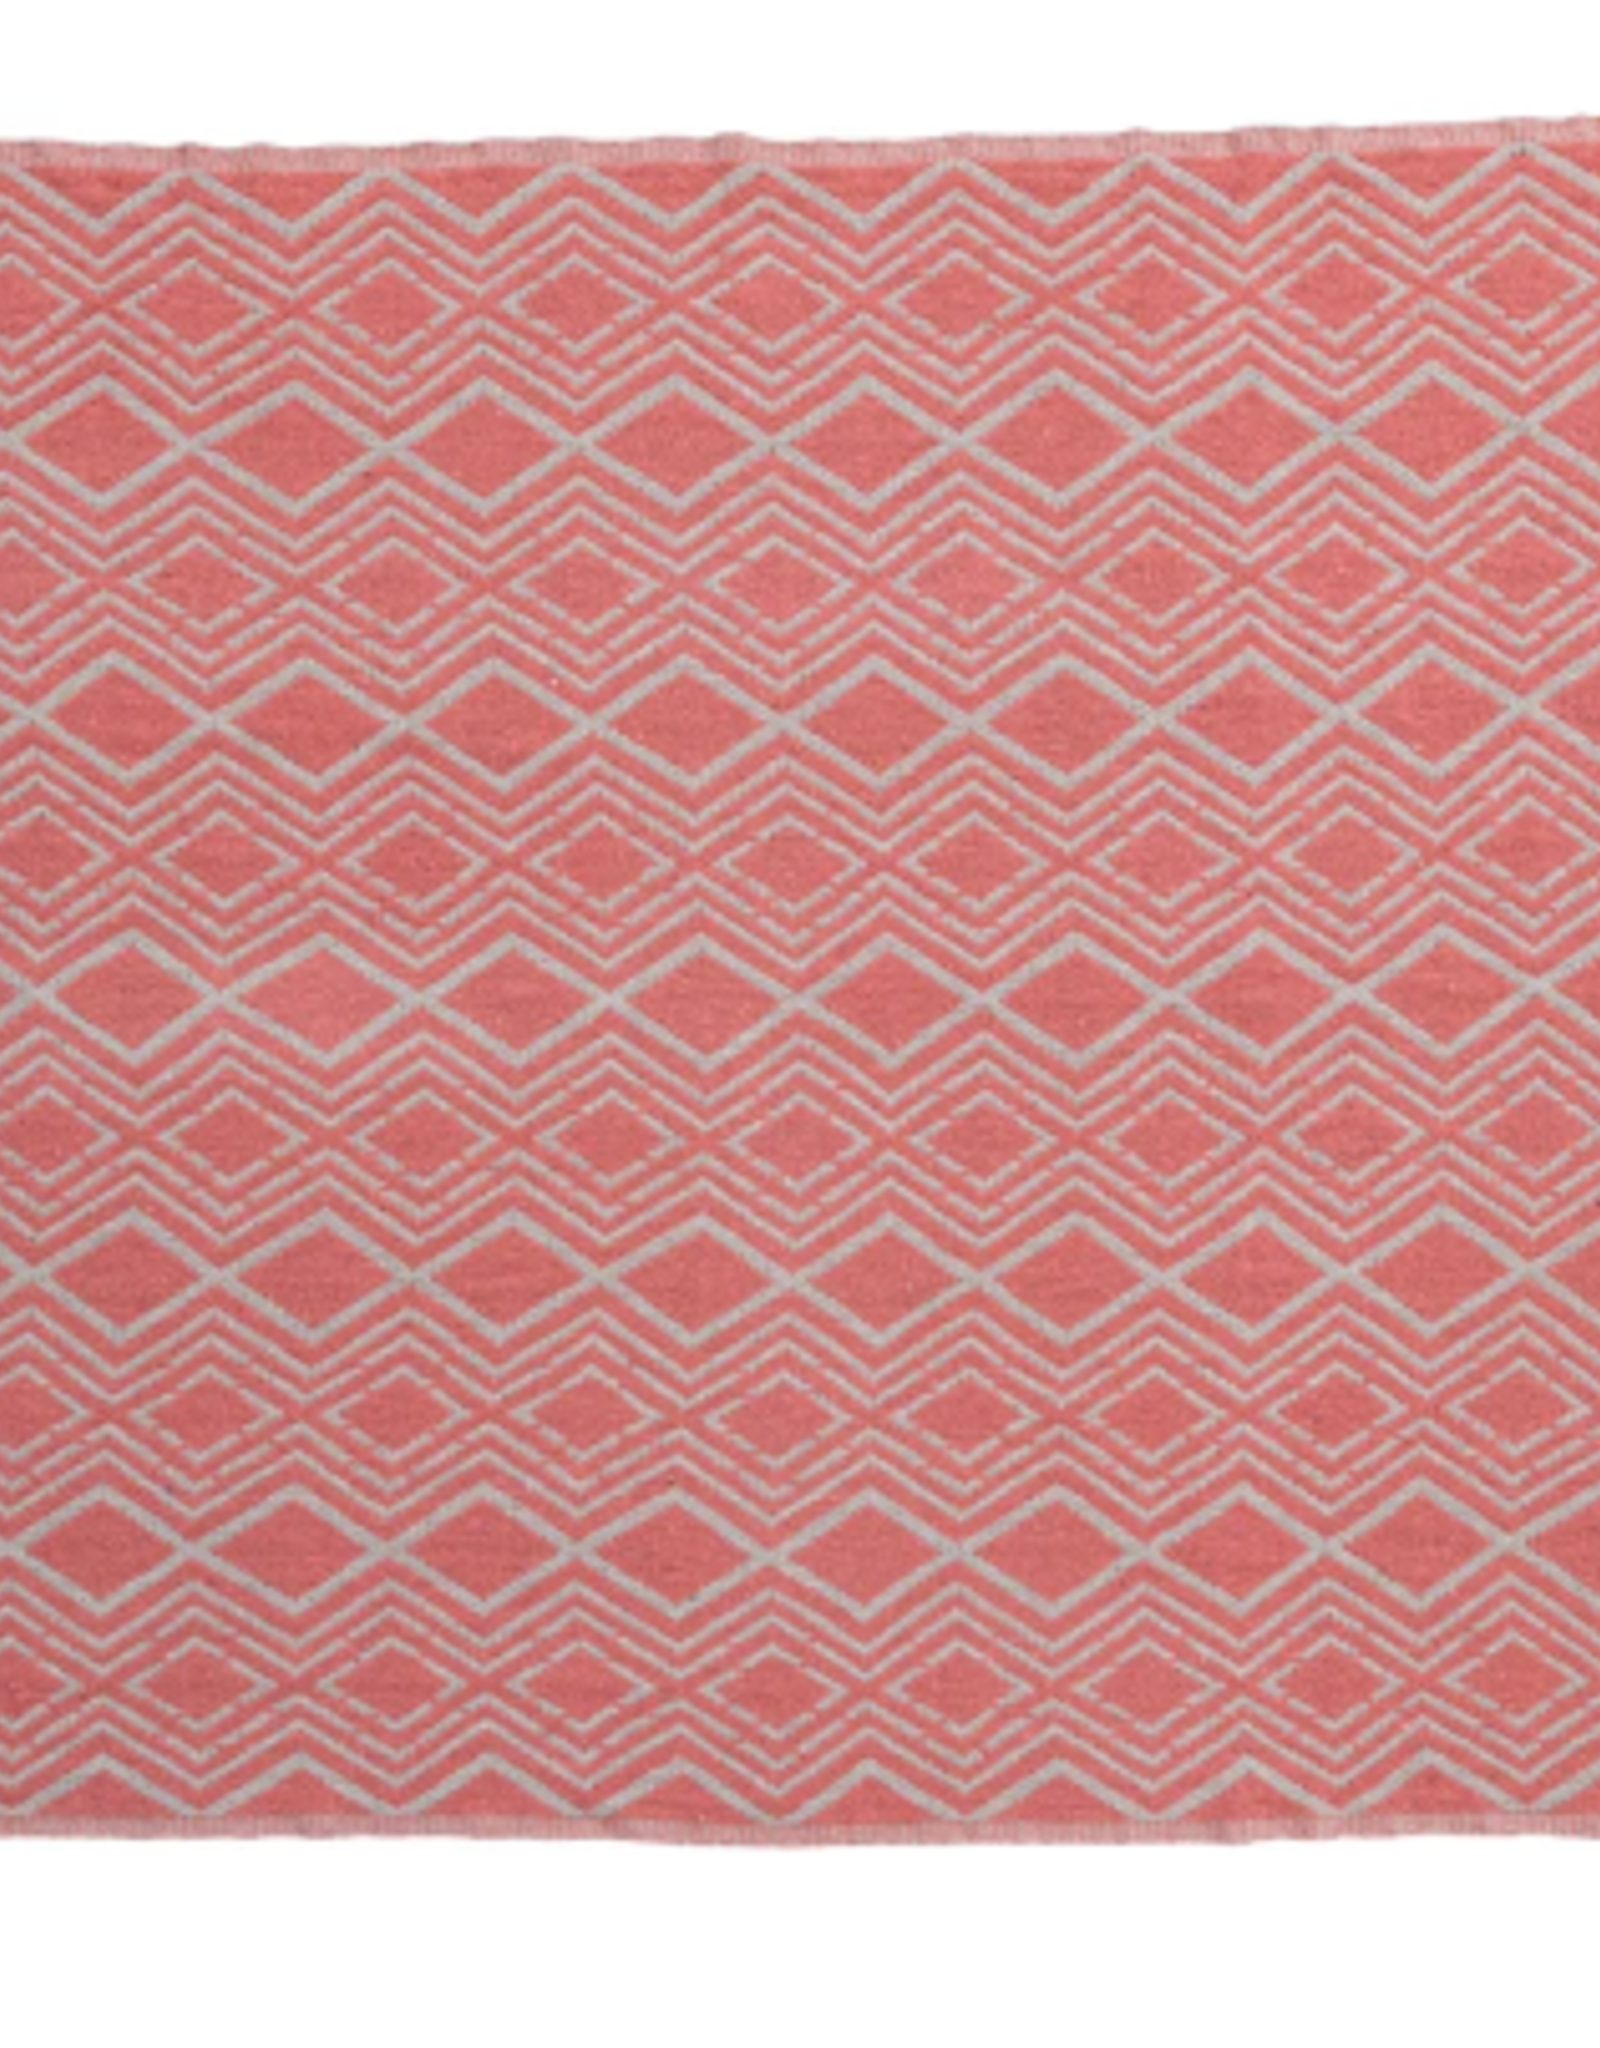 Creative Co-Op Throw Blanket: Recycled Cotton Pink Chevron 60" by 50"